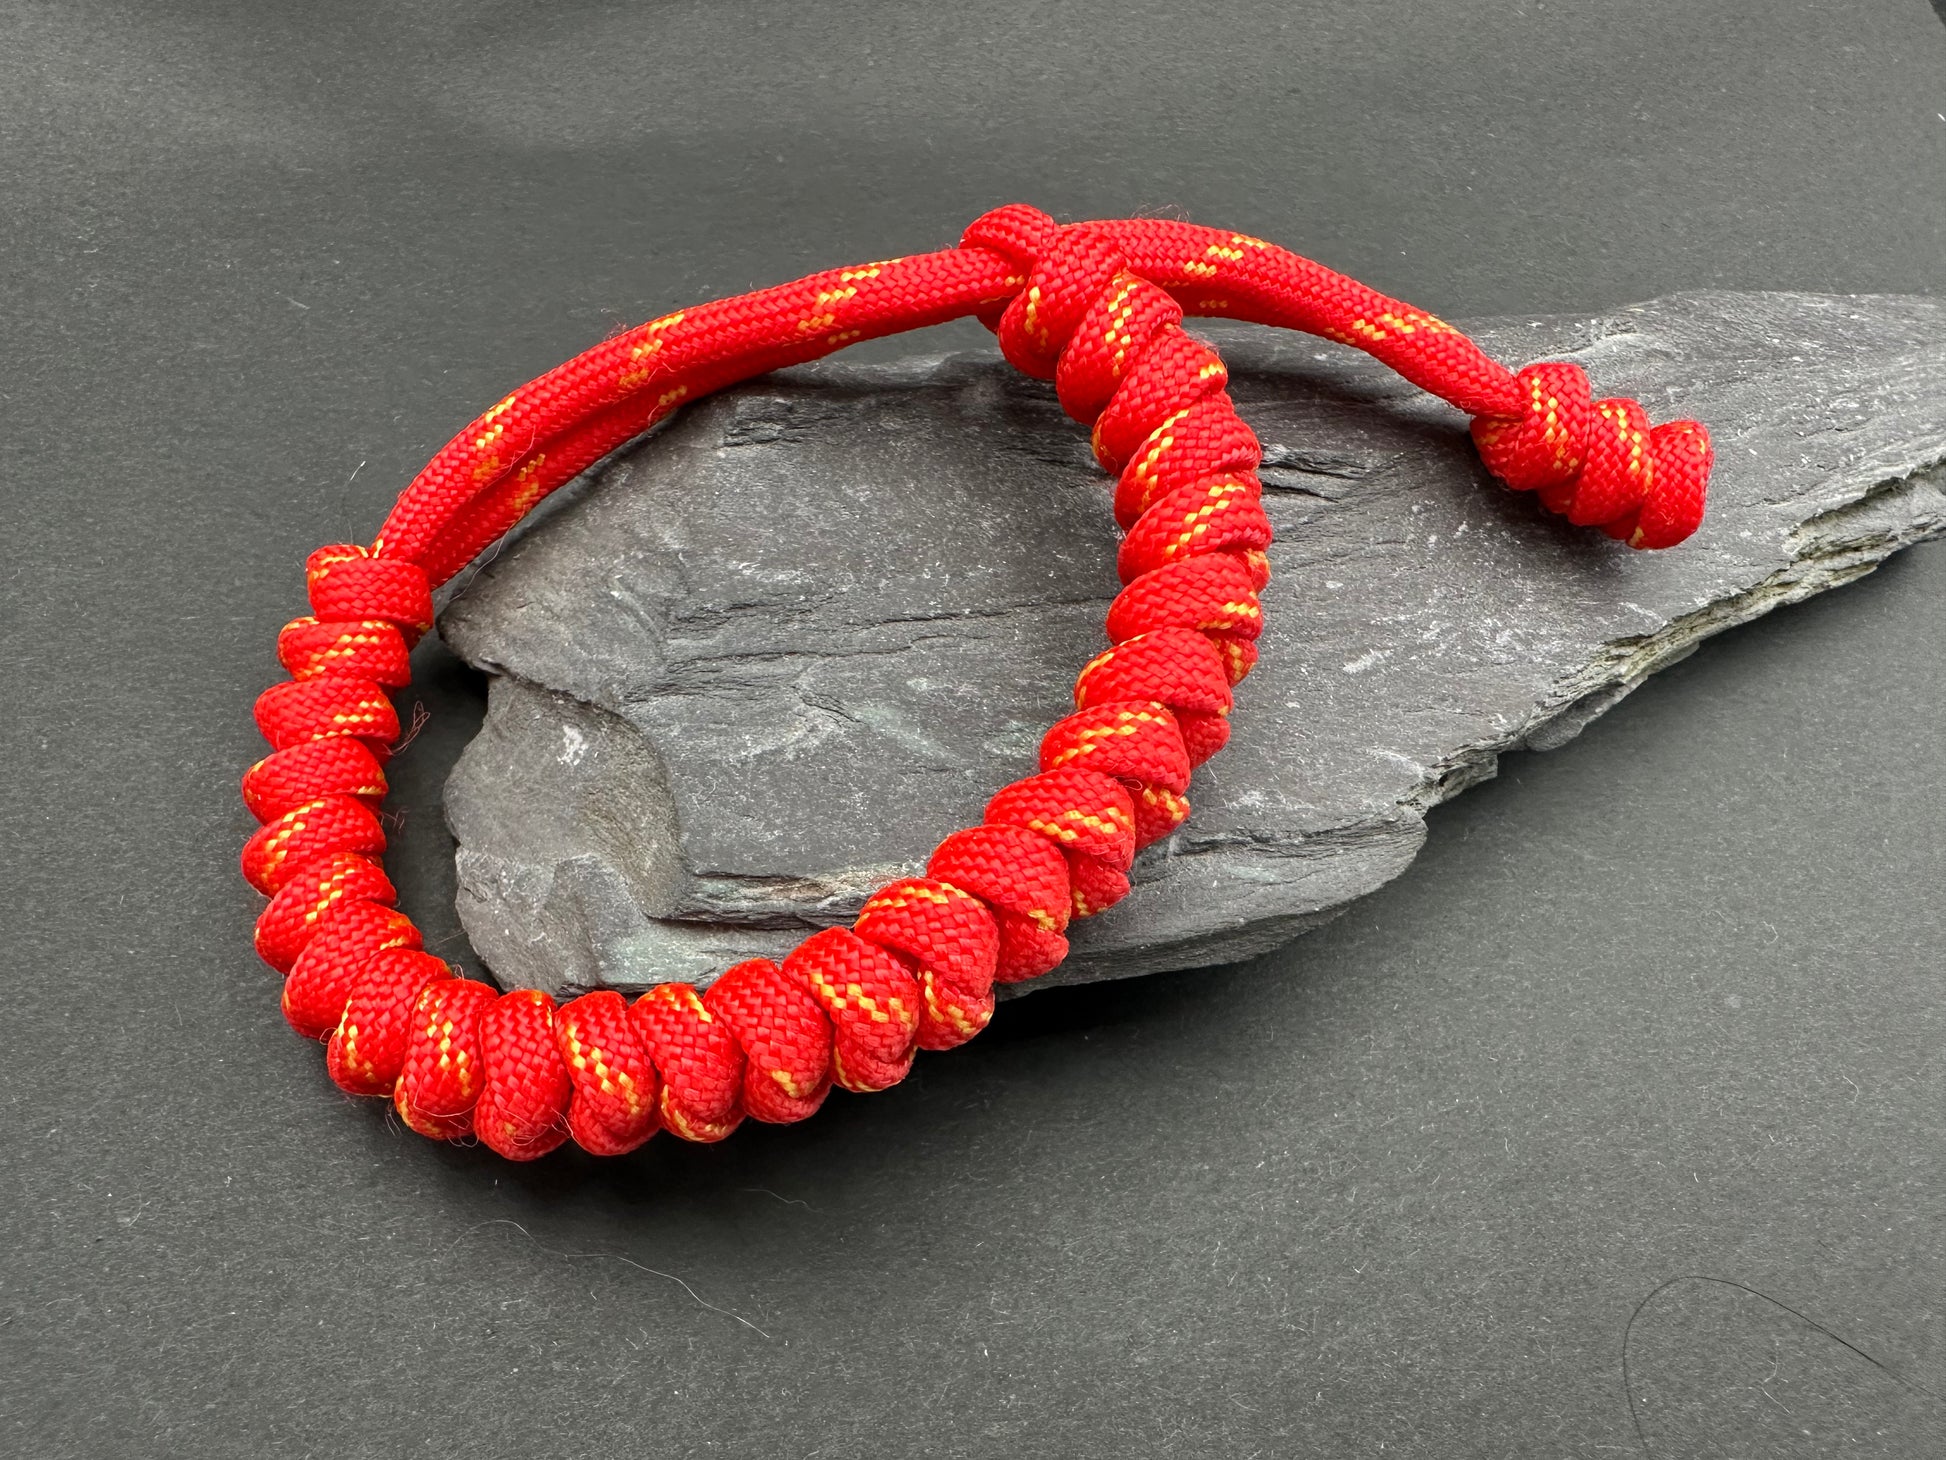 Paracord survival bracelets in the Pheonix red colour (red with yellow flecks) the item is lightweight comfortable and handmade in a snake knott tactical design U.K.